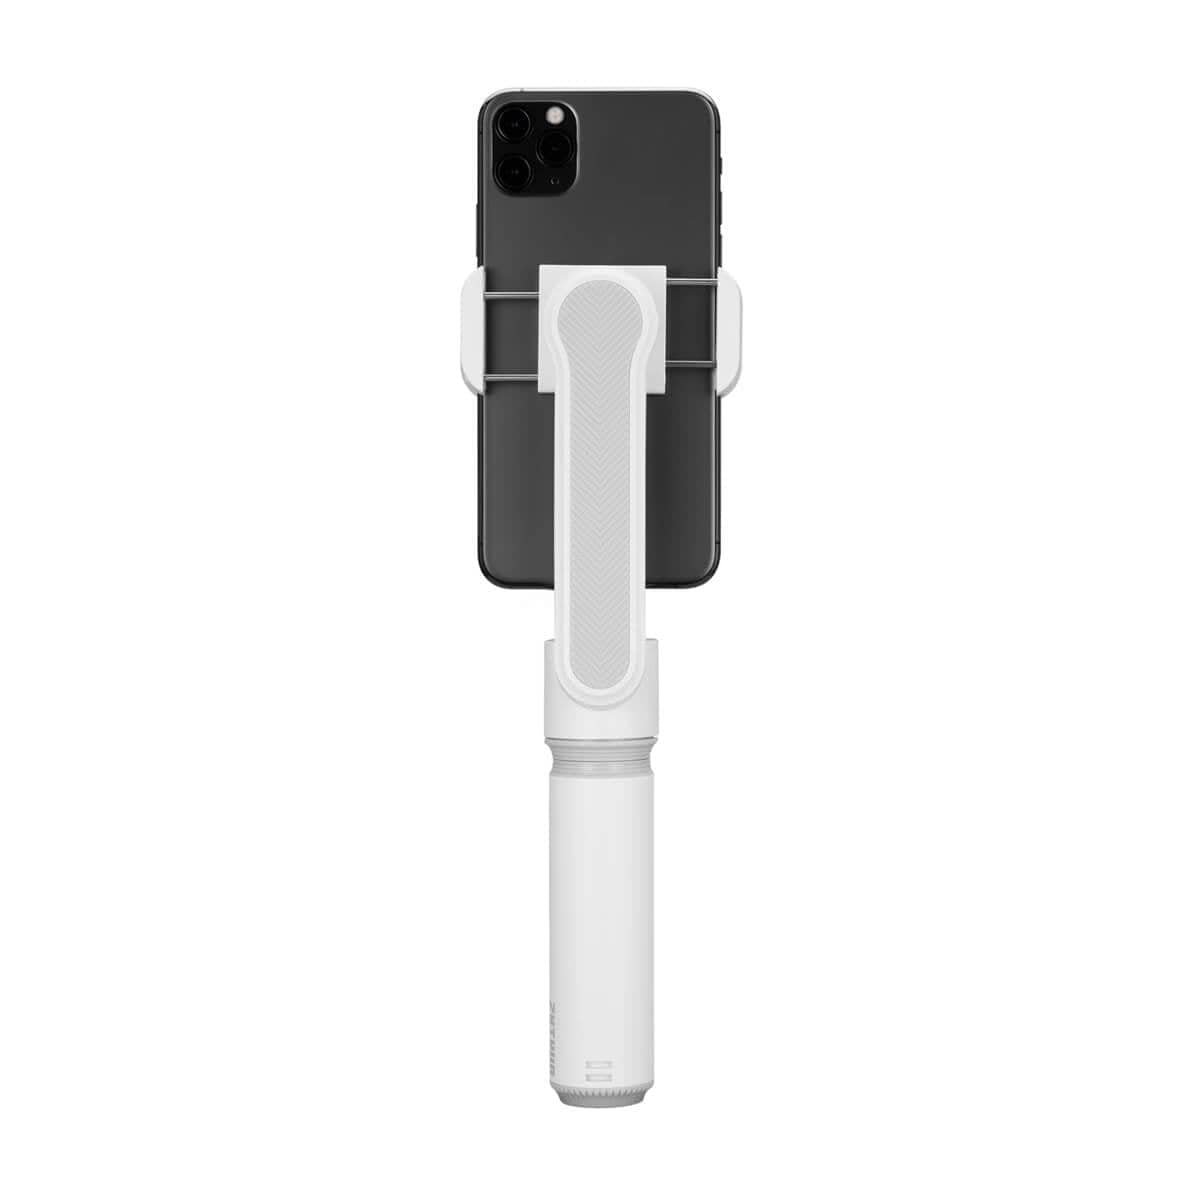 Zhiyun Smooth X Essential Combo 2-Axis Gimbal Stabilizer for Smartphones in White - Atlantic Electrics